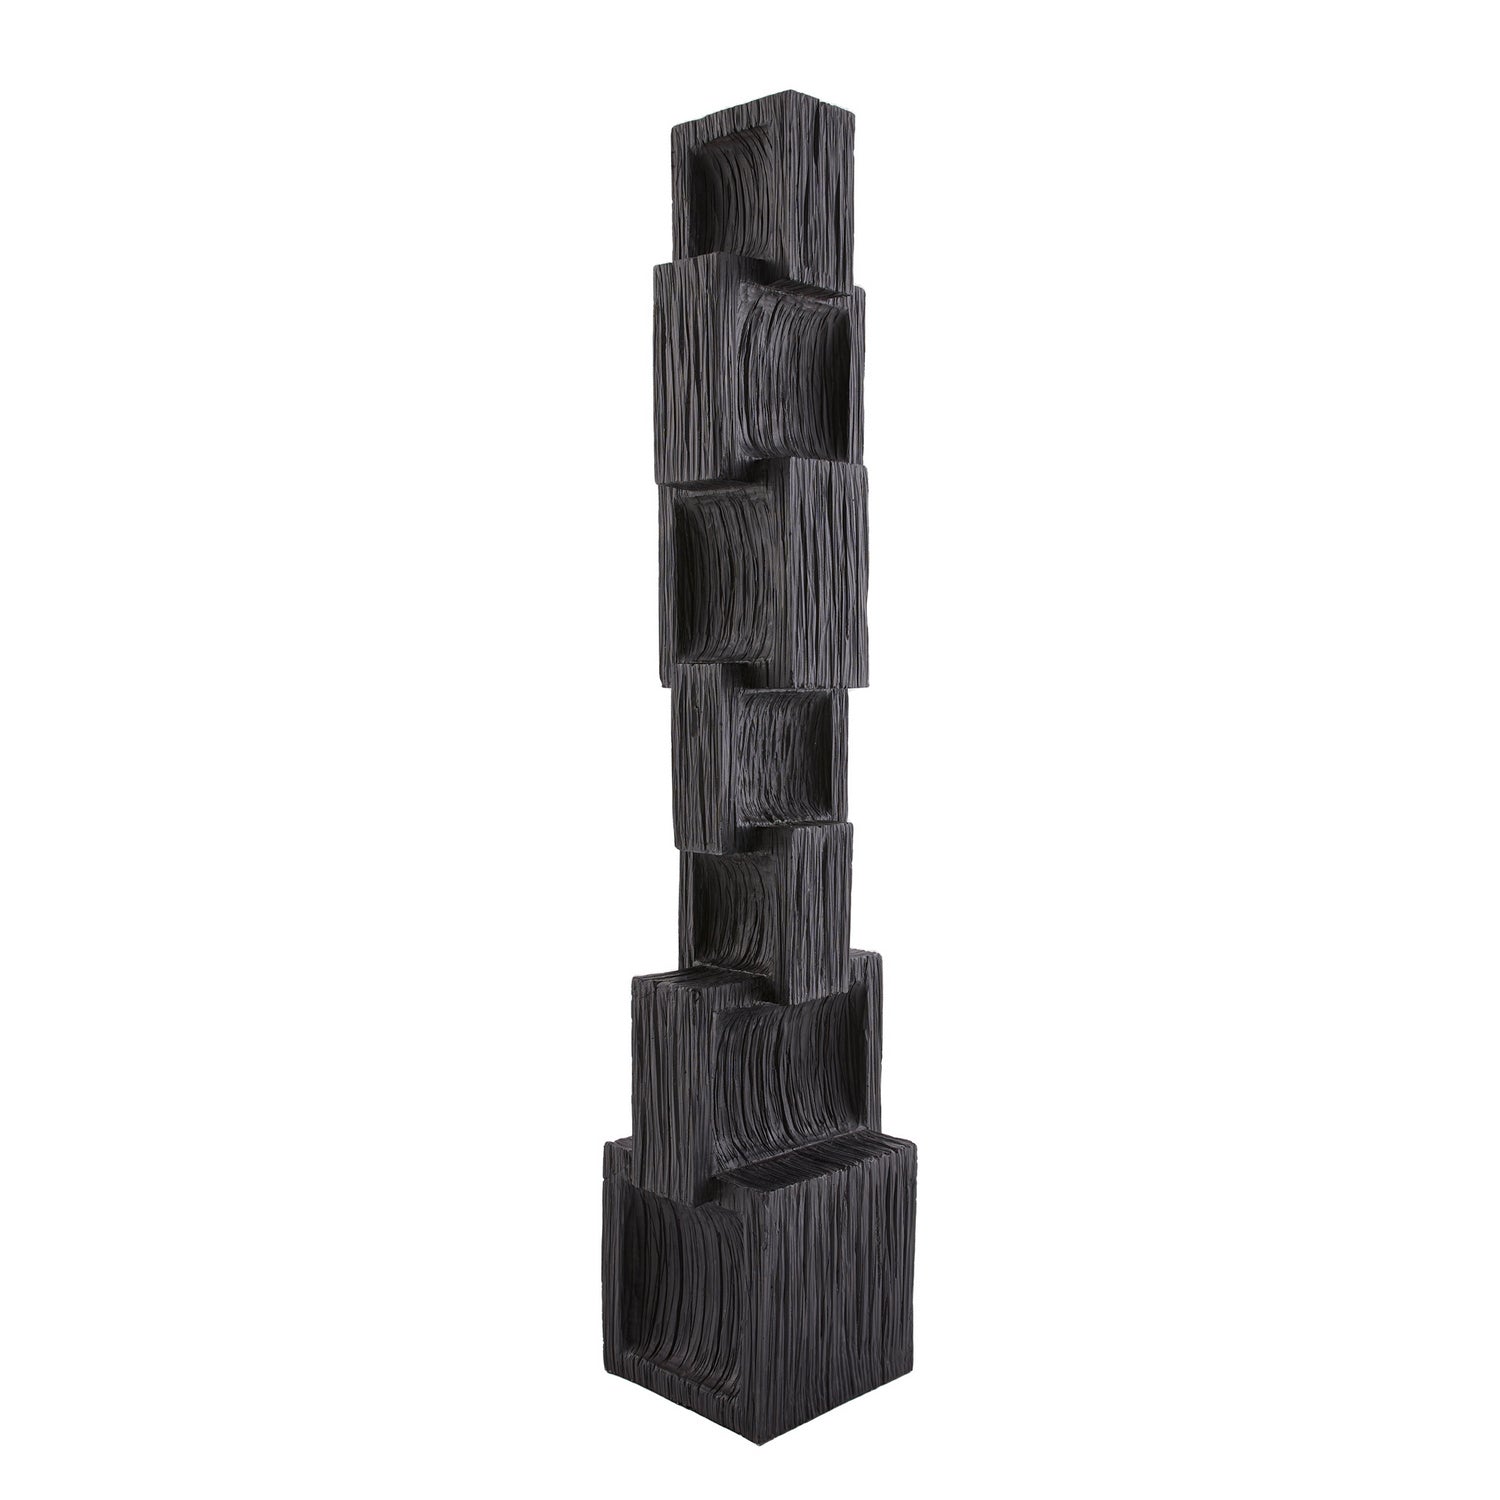 Floor Sculpture from the Rollins collection in Ebony finish